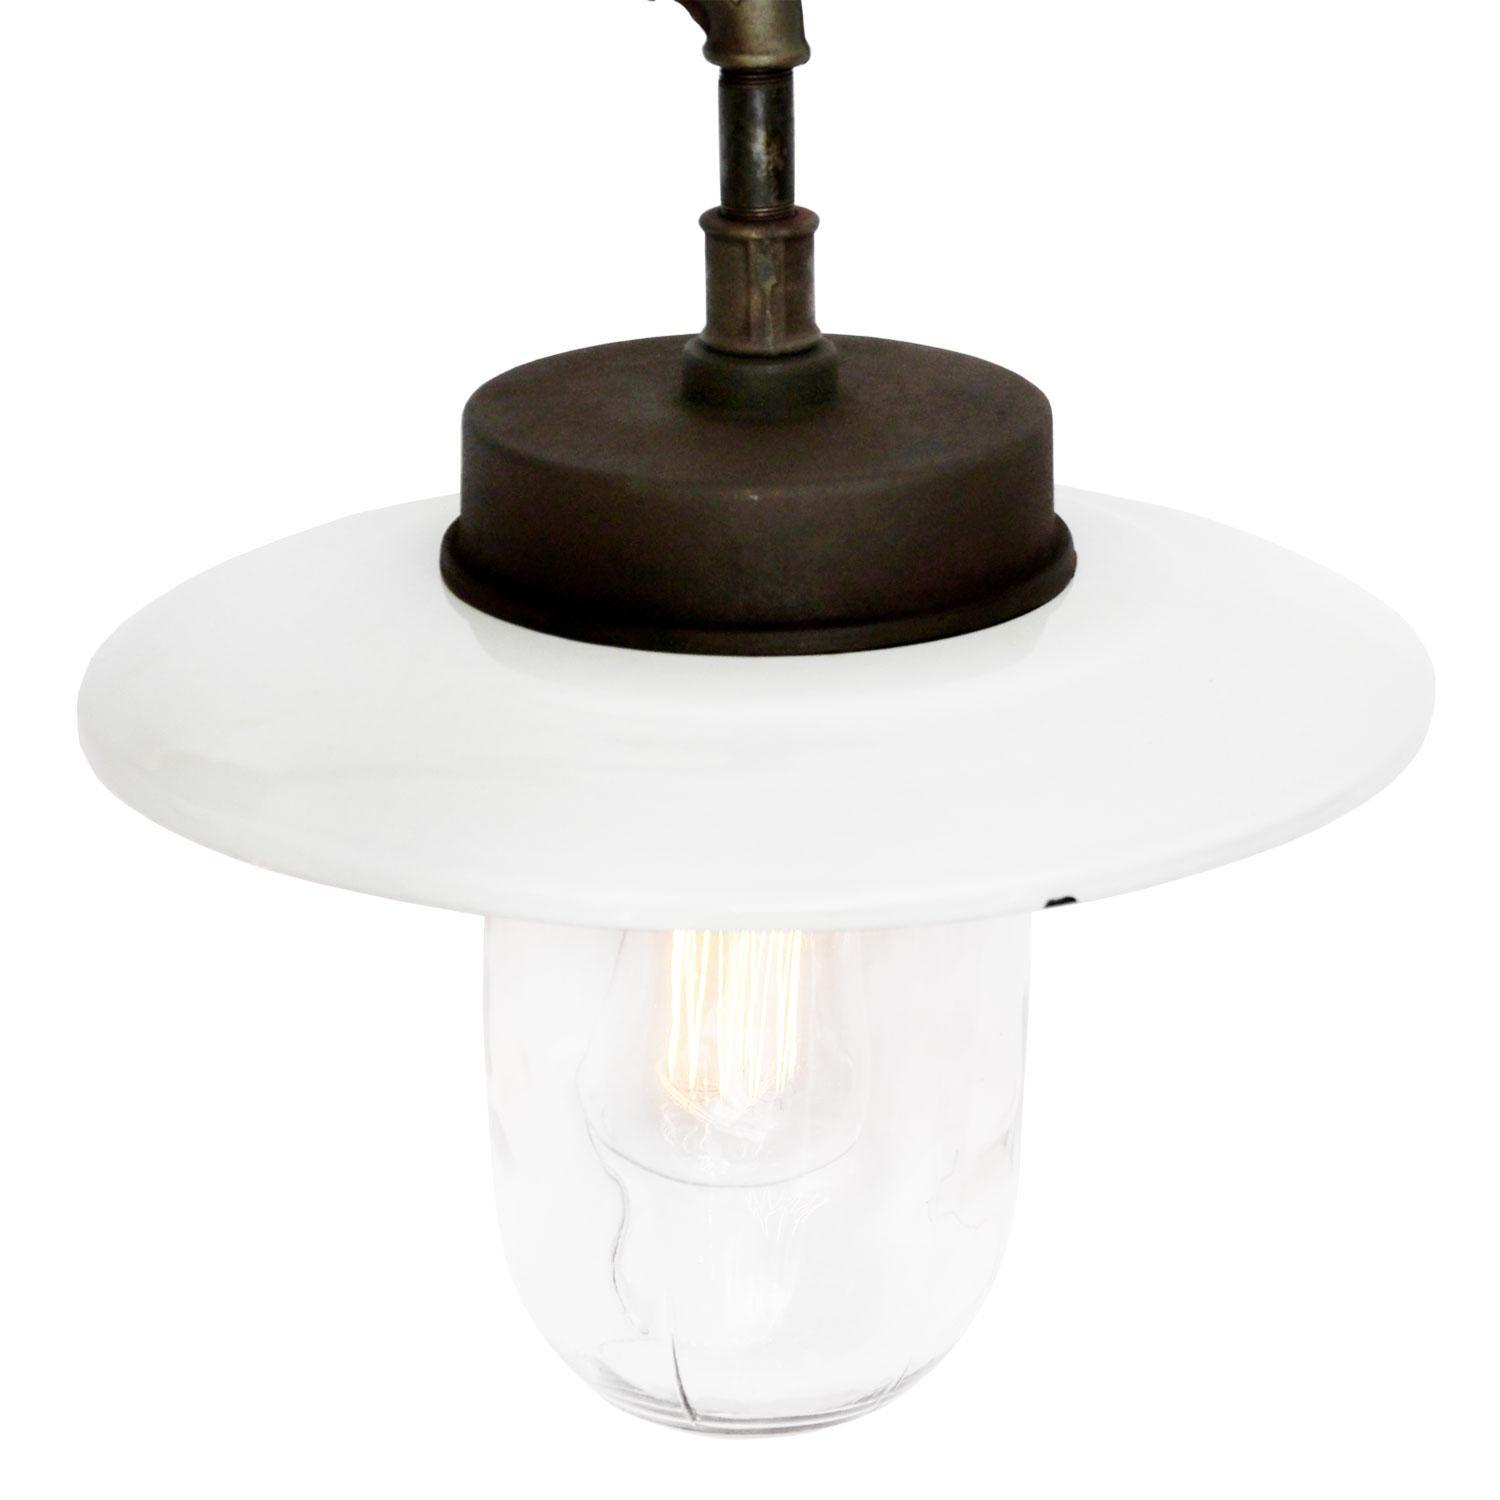 White enamel industrial wall light. 
Clear glass. Measures: 

Diameter cast iron wall piece: 12 cm. Three holes to secure.

Weight: 6.5 kg / 14.3 lb

All lamps have been made suitable by international standards for incandescent light bulbs,